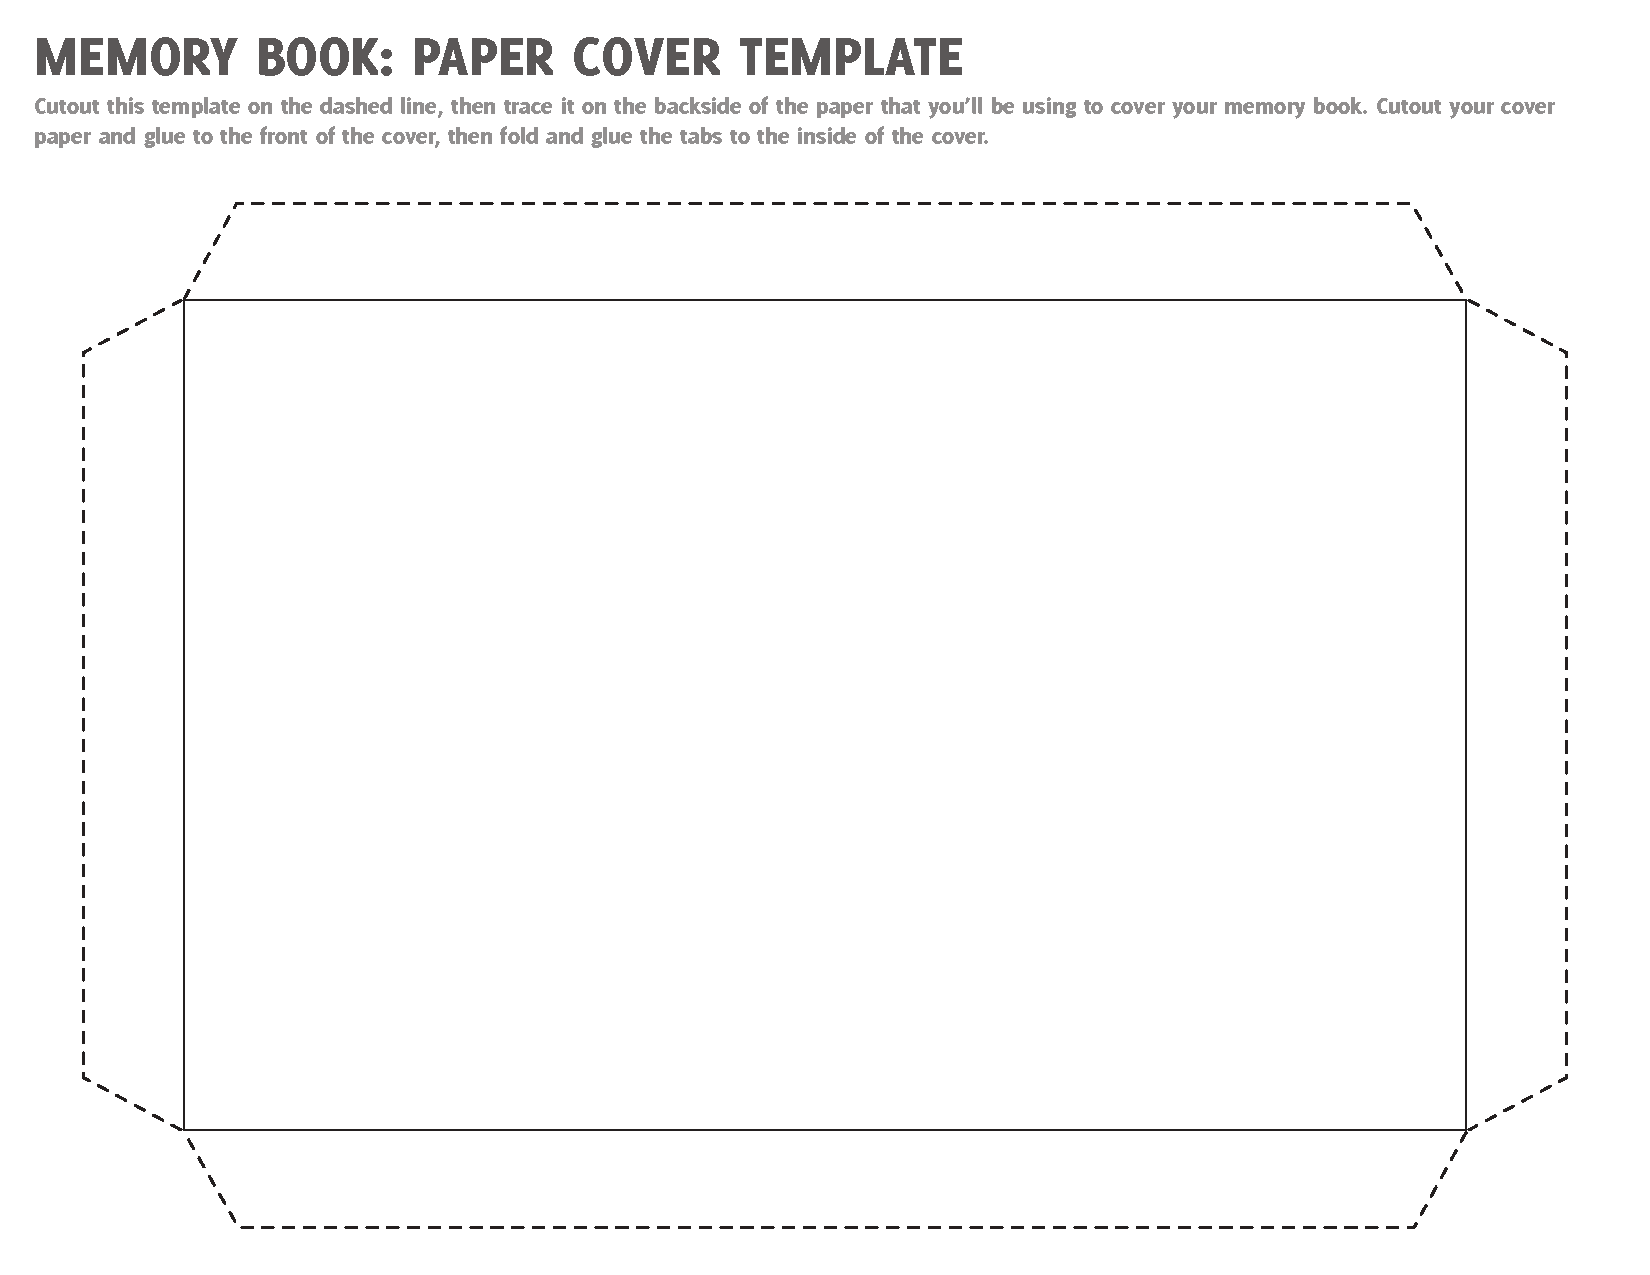 17 Paper Book Cover Template Images